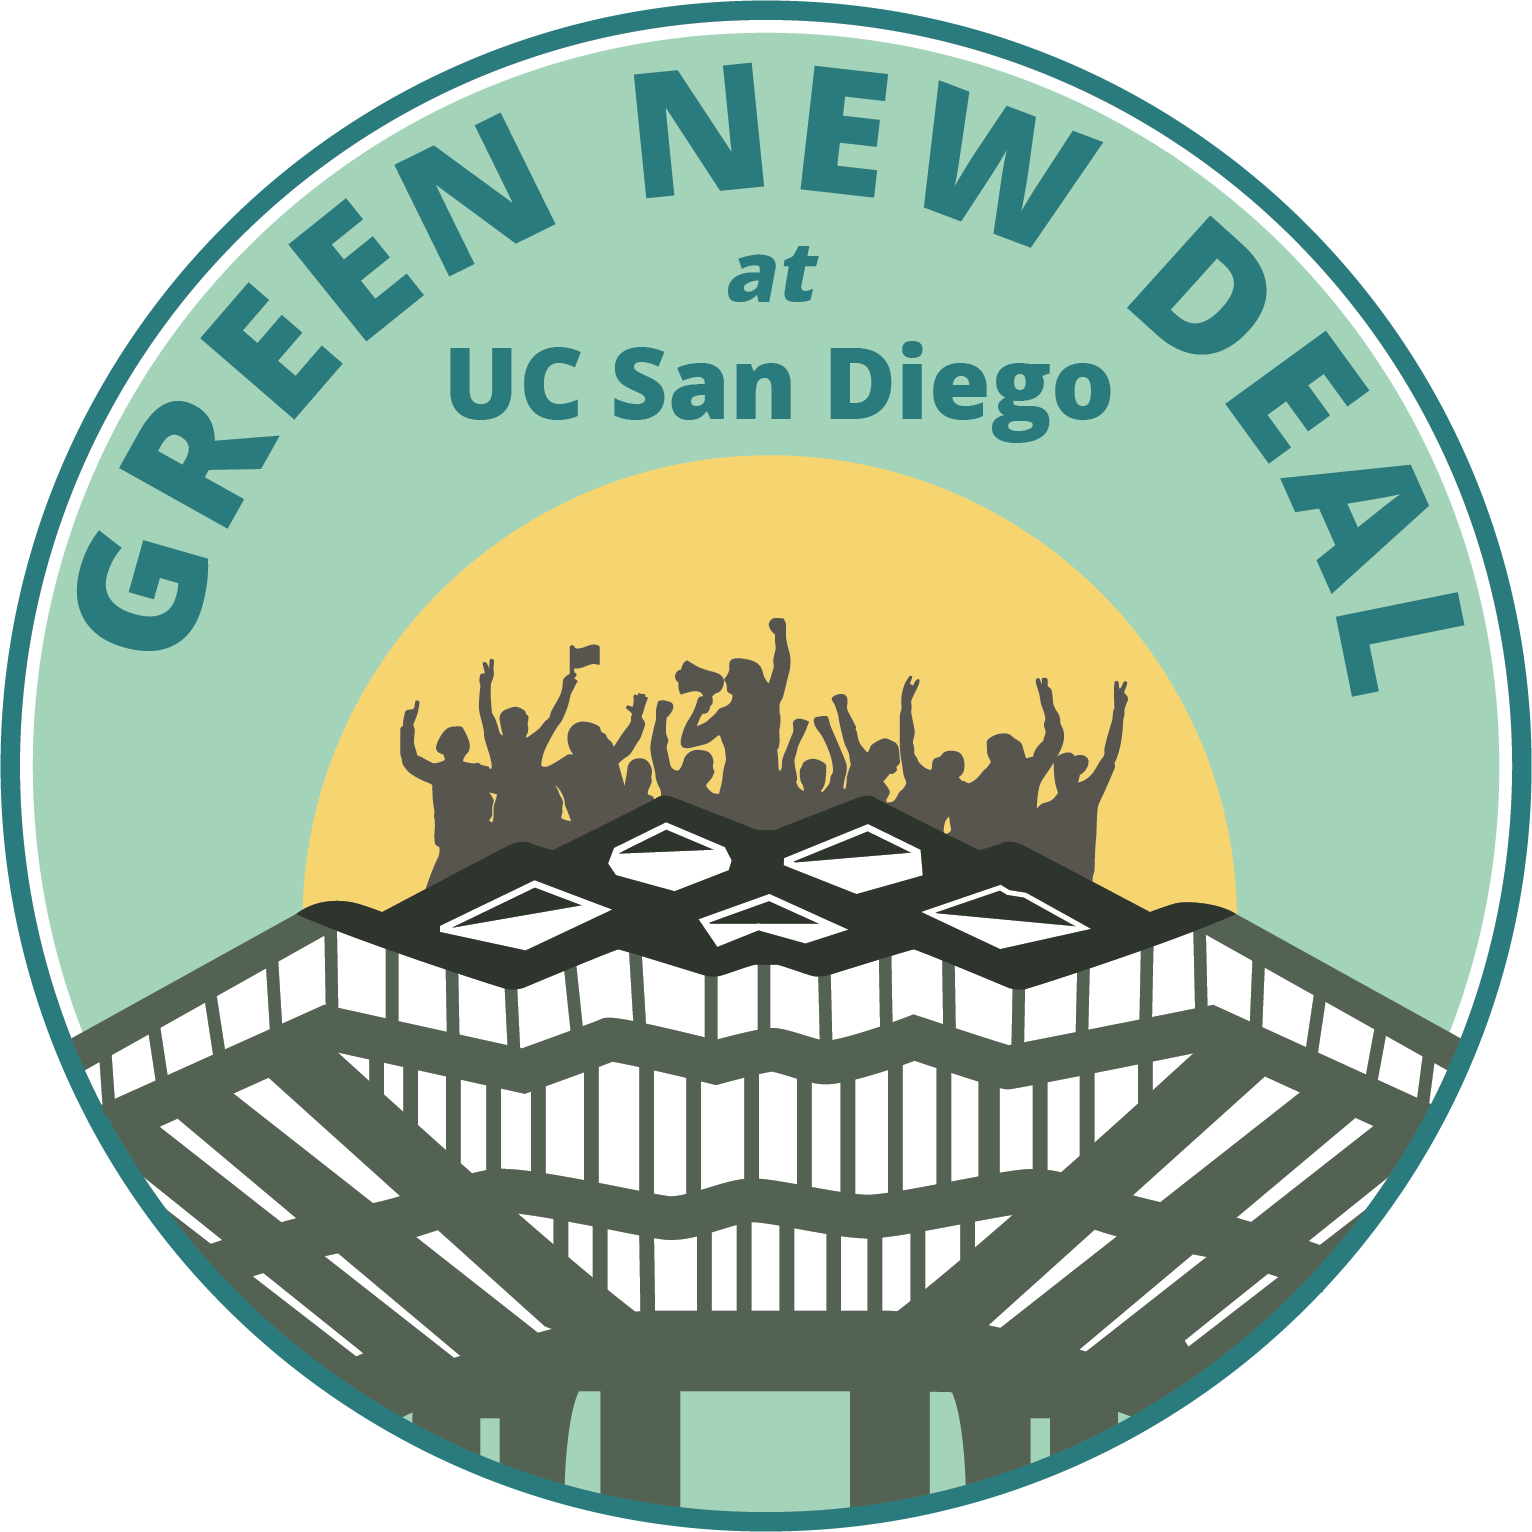 Green New Deal at UC San Diego 